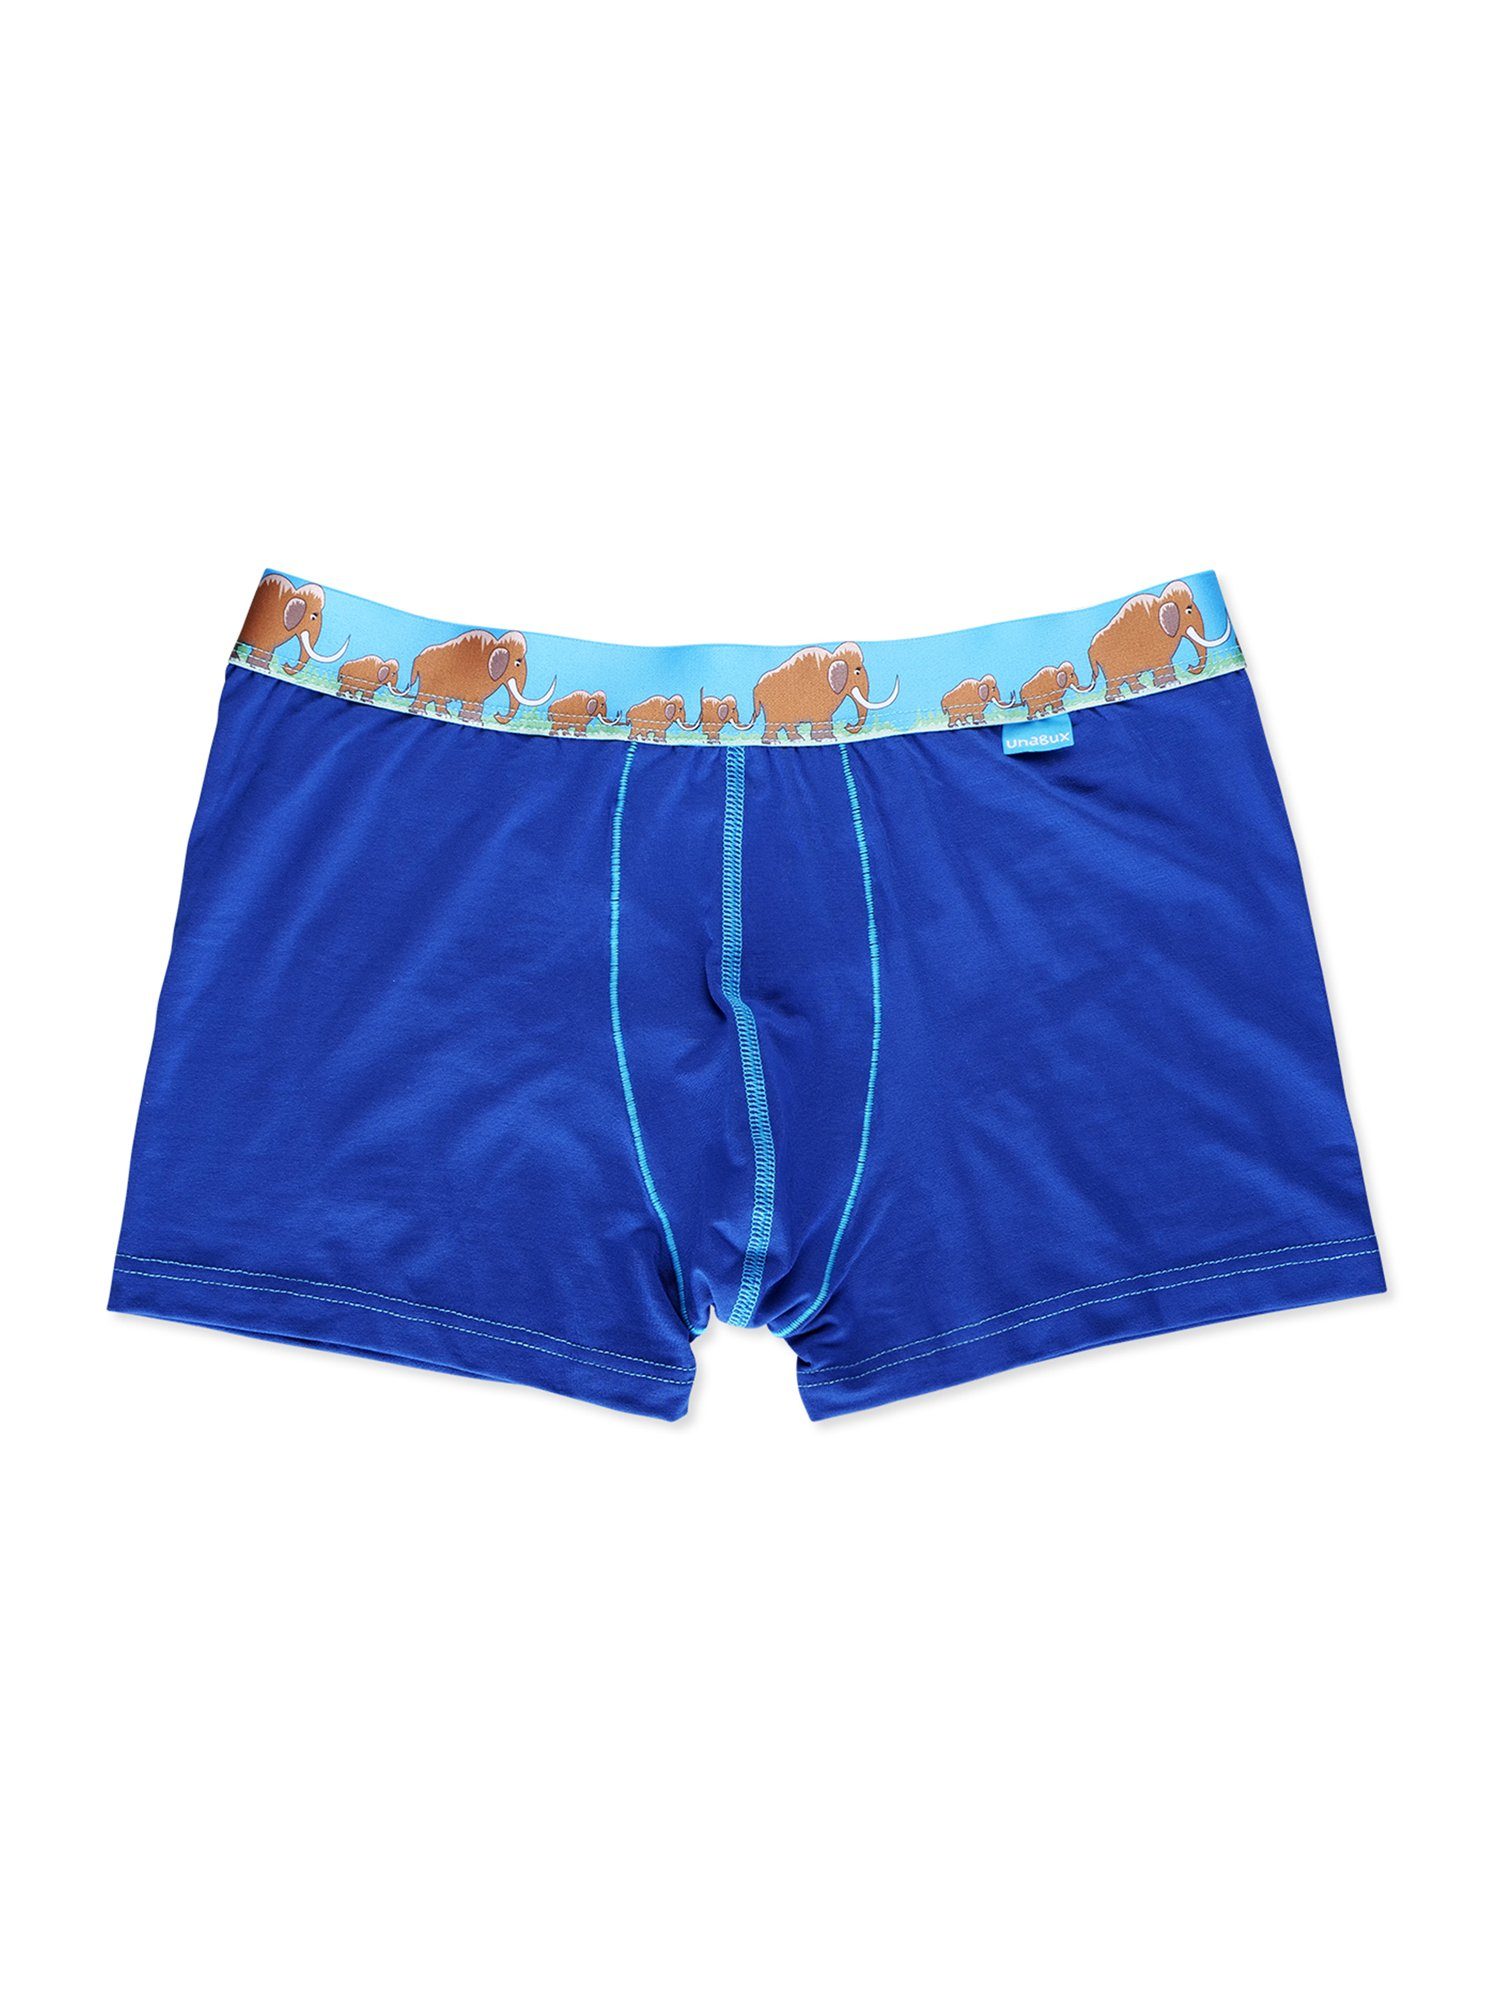 UnaBux Boxer Briefs / WOOLHEAD Doppelpack Boxershorts (2-St) MAMOUTH HIKE FIVE FINGERS